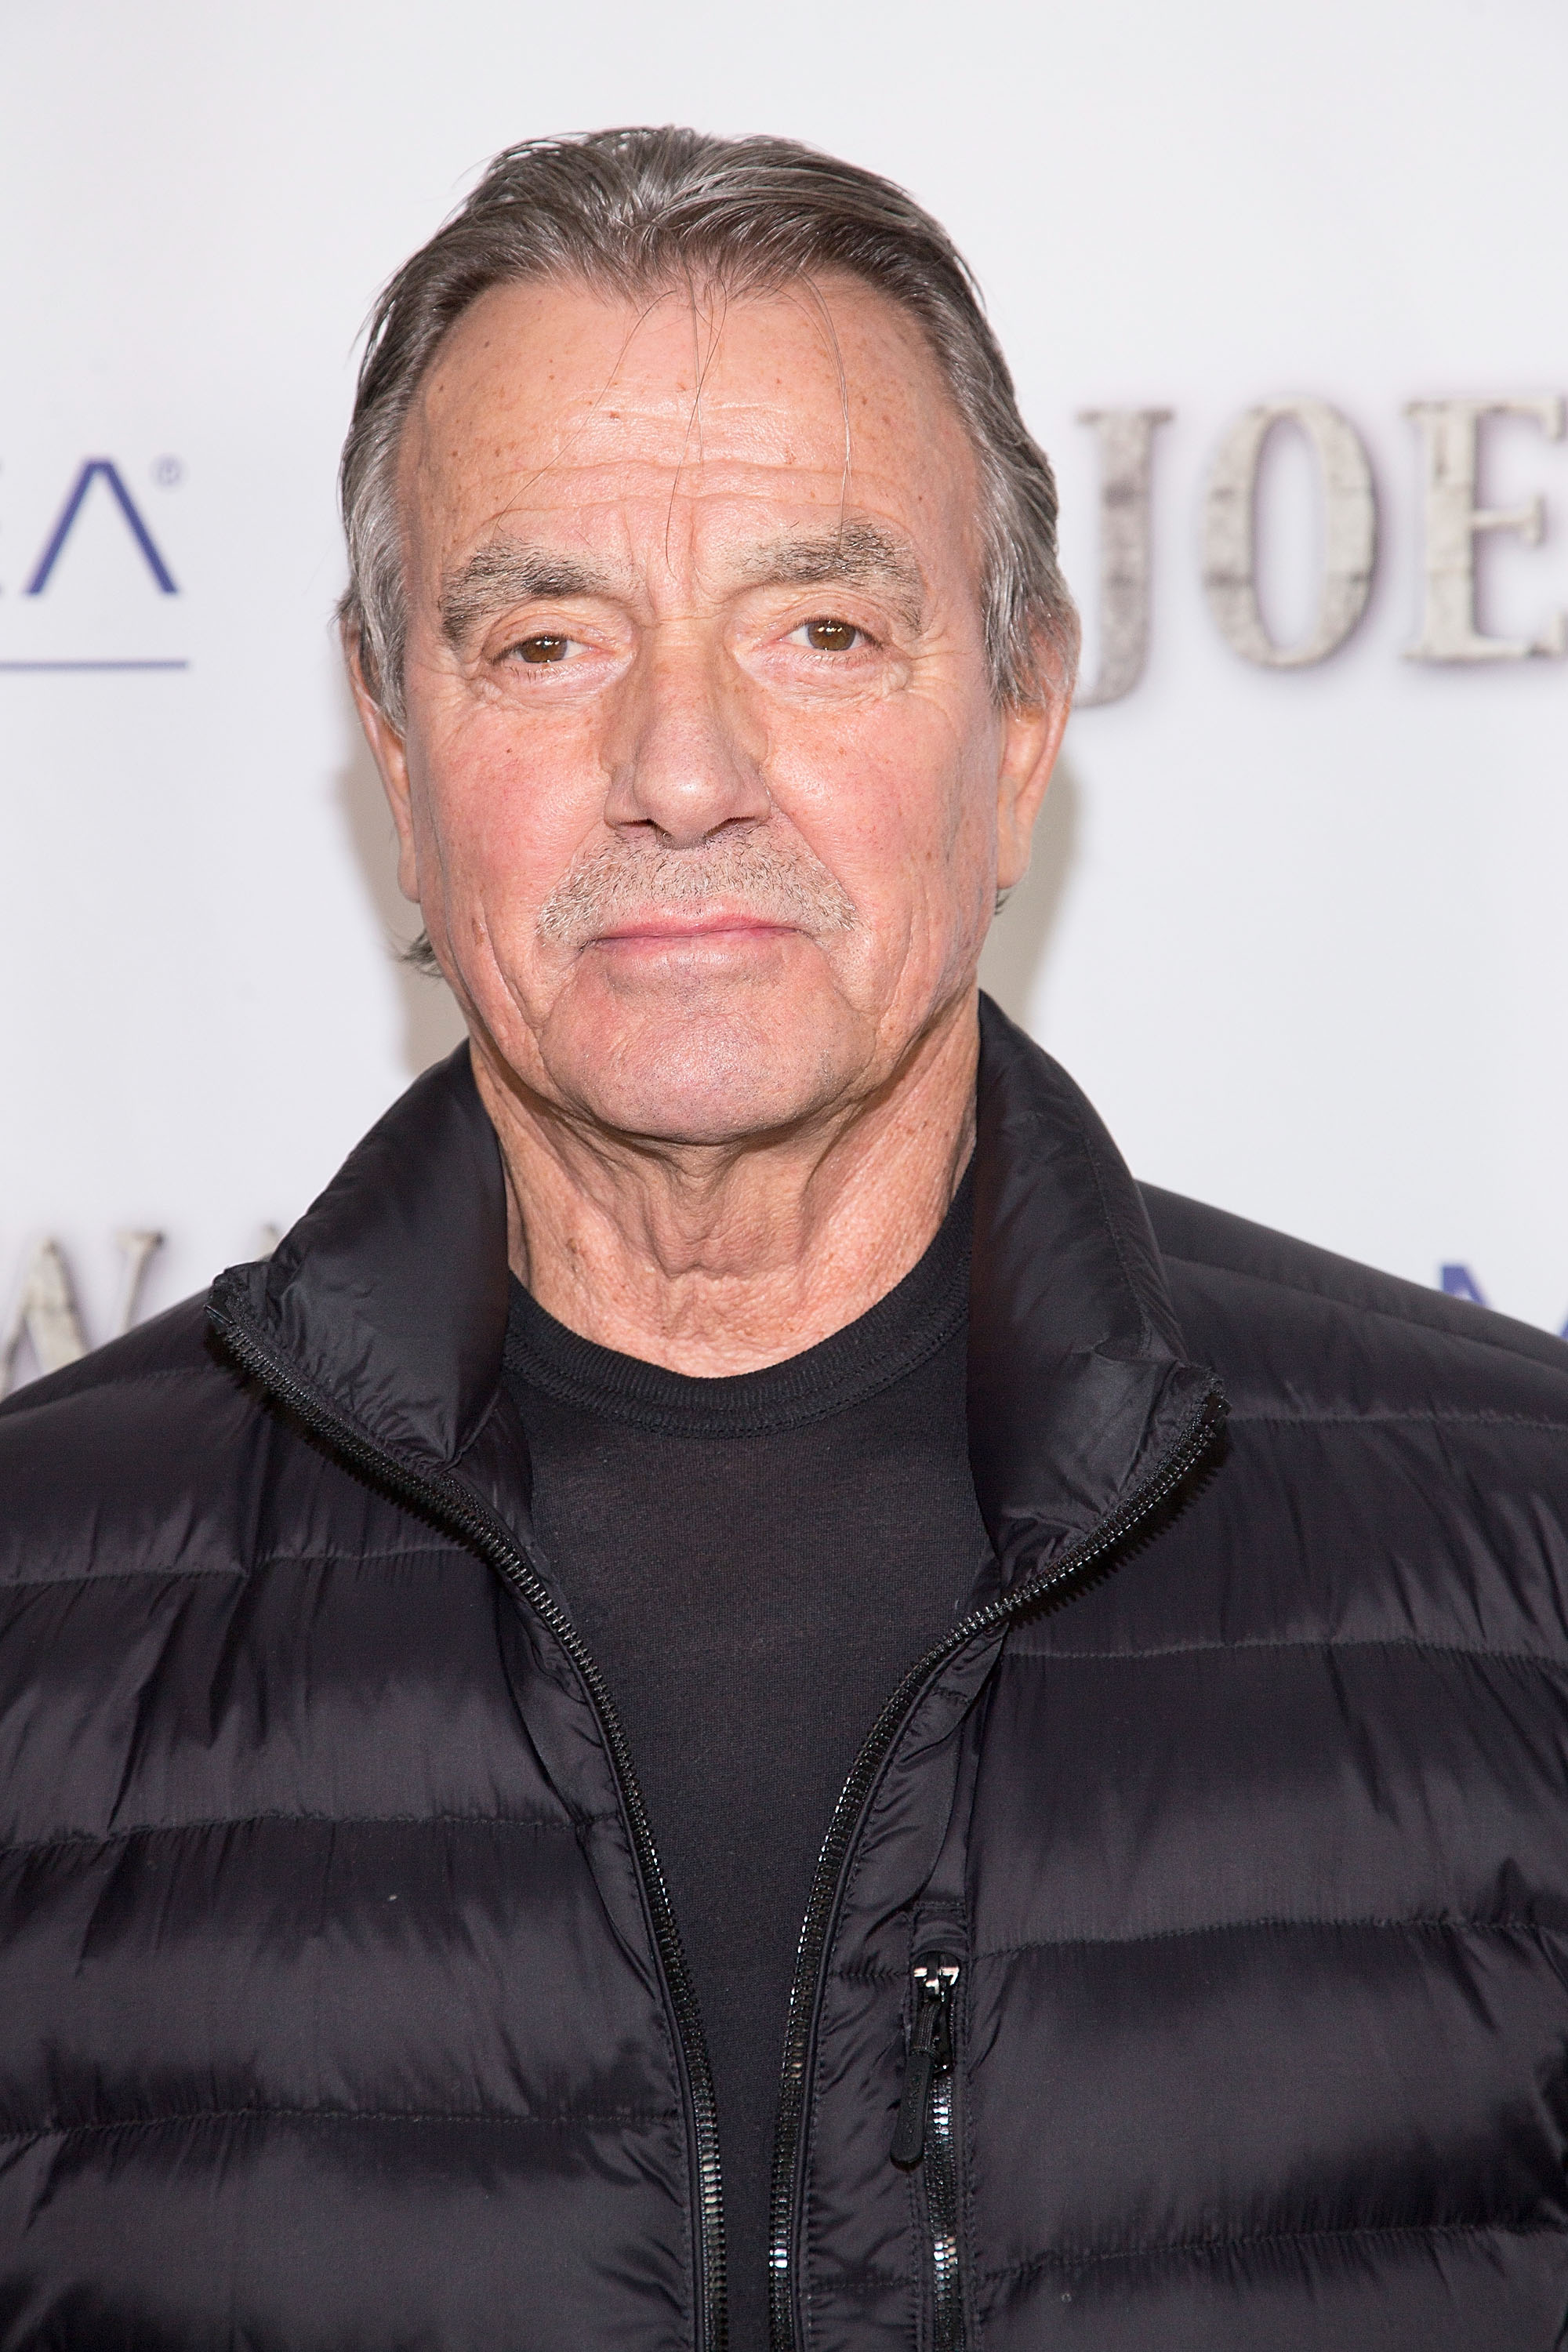 Eric Braeden arrives at the premiere of "Joe's War" at Harmony Gold on November 5, 2015, in Los Angeles, California. | Source: Getty Images